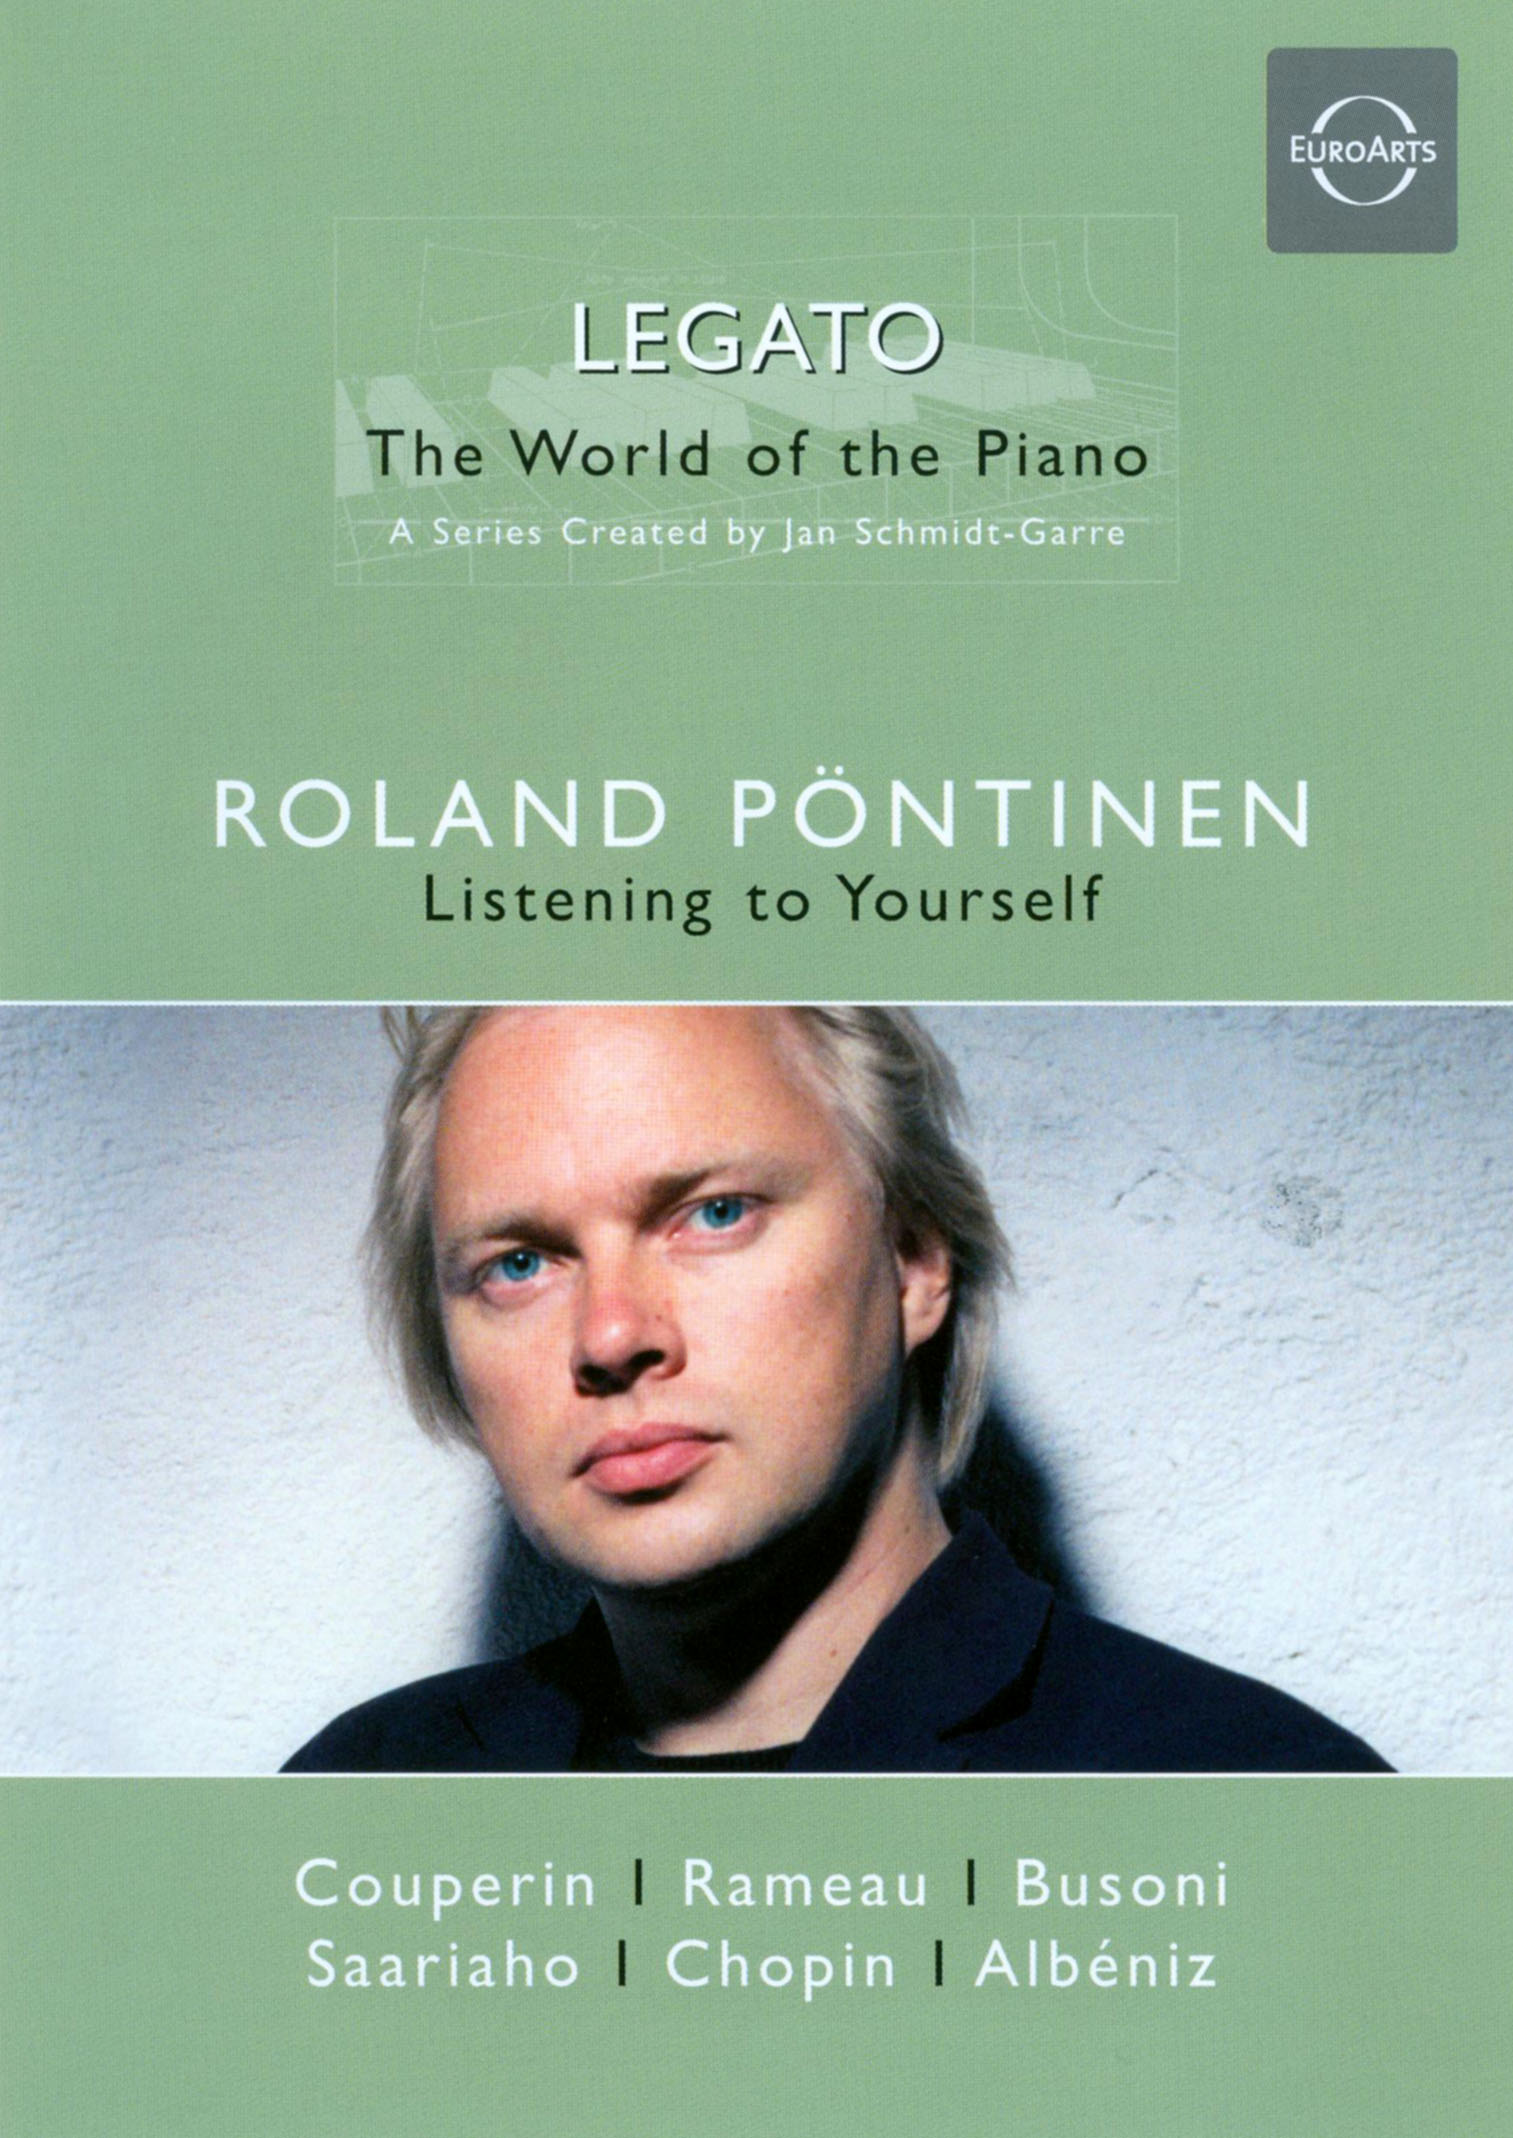 Legato: The World of the Piano - Roland Pontinen: Listening to Yourself [DVD] [2007]